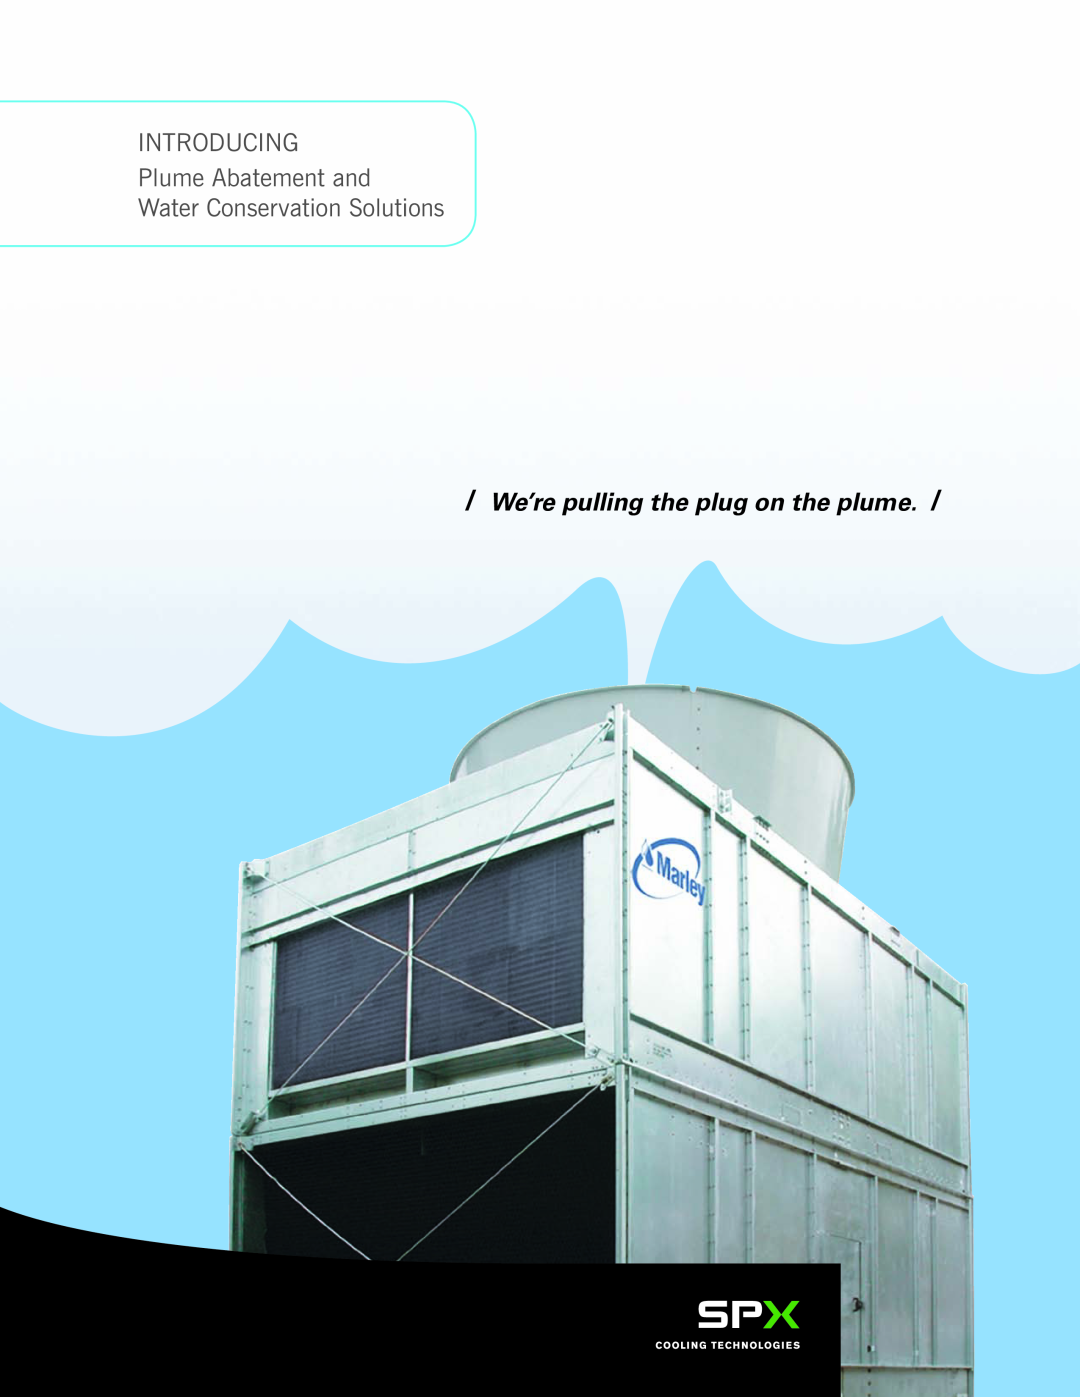 SPX Cooling Technologies Hybrid Cooling Towers manual Introducing Plume Abatement and, Water Conservation Solutions 